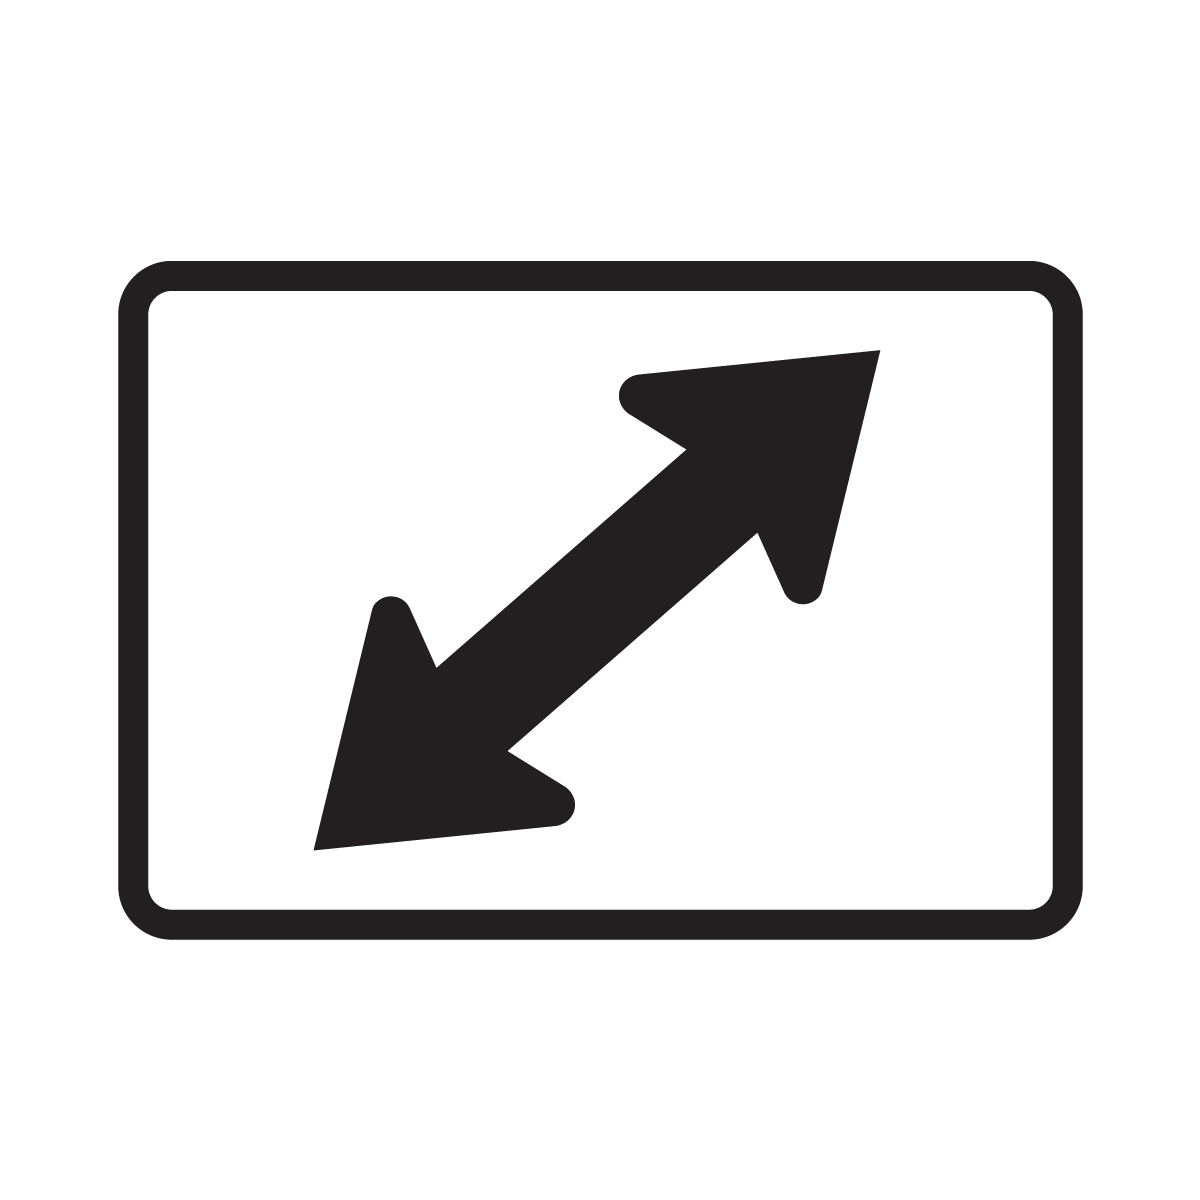 M6-5 Two-Direction Diagonal Turn Arrow (Left or Right)